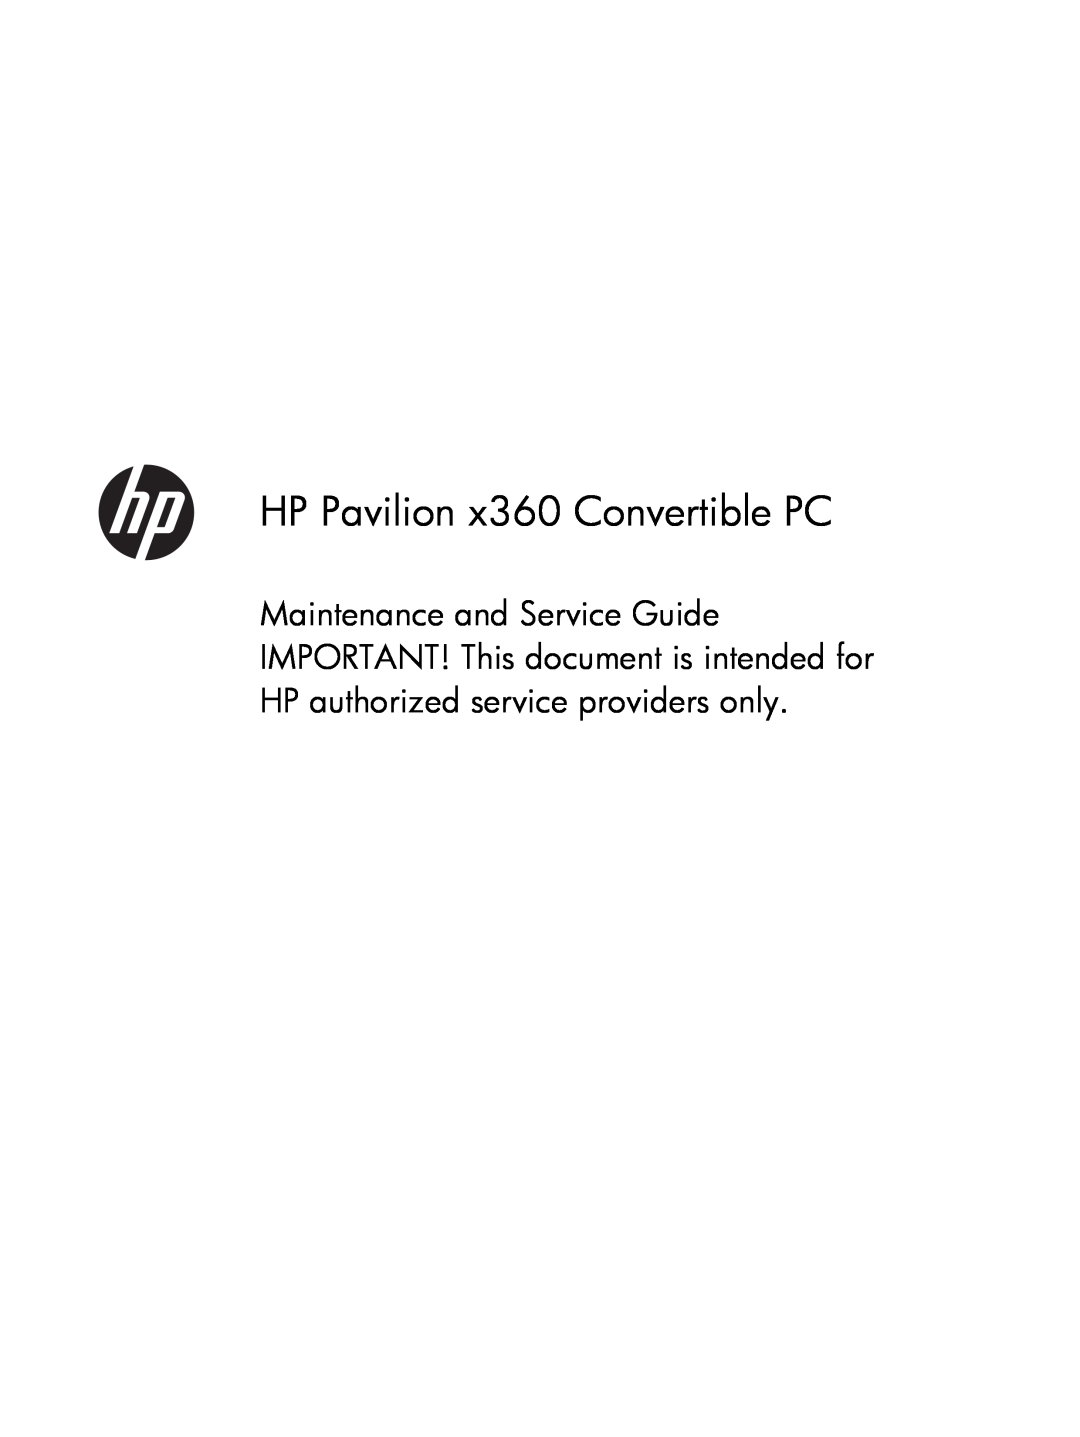 HP TX2-1375DX, c500, 1575AP, XU manual HP Notebook Hard Drives & Solid State Drives, Identifying, Preventing, Diagnosing and 